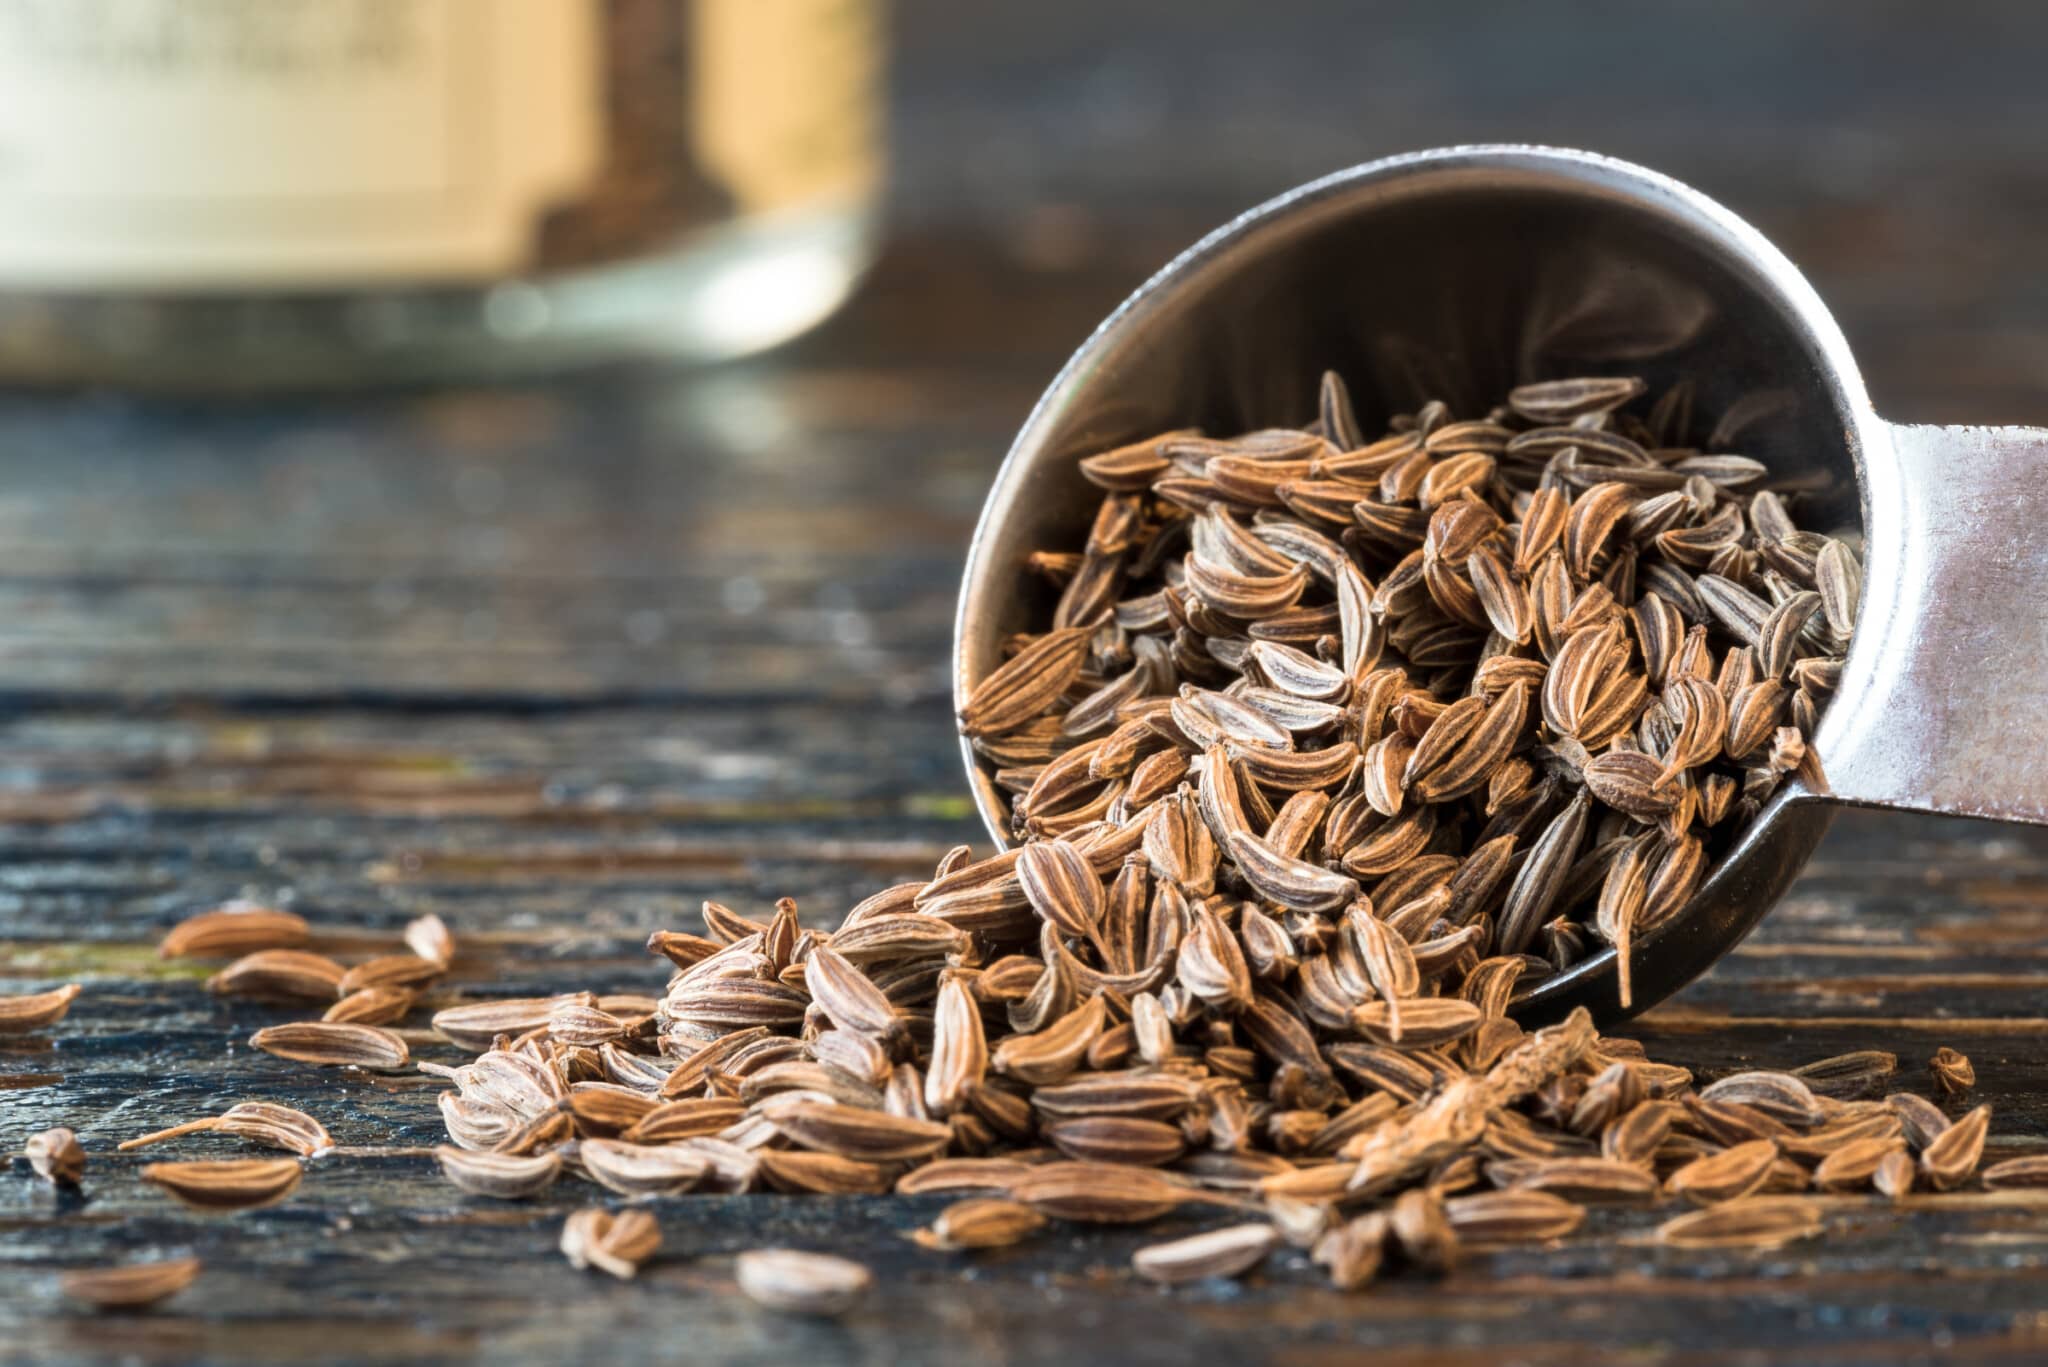 What Are Caraway Seeds Used For